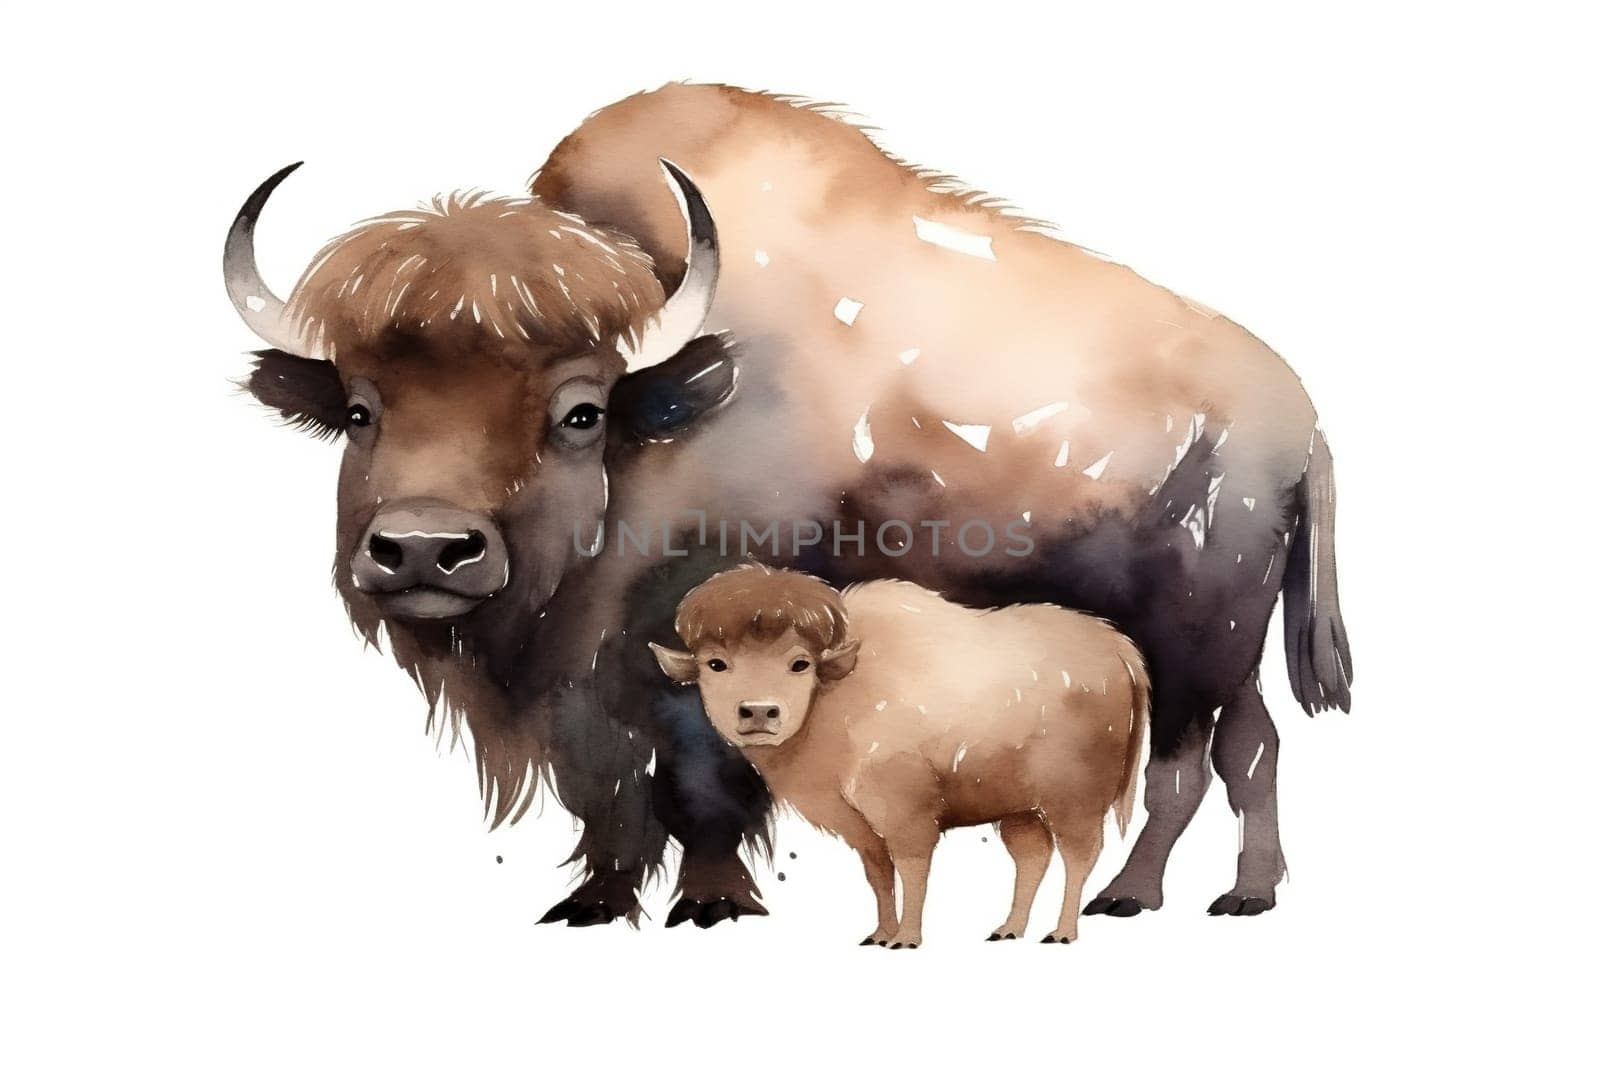 watercolor painting illustration of buffalo by GekaSkr